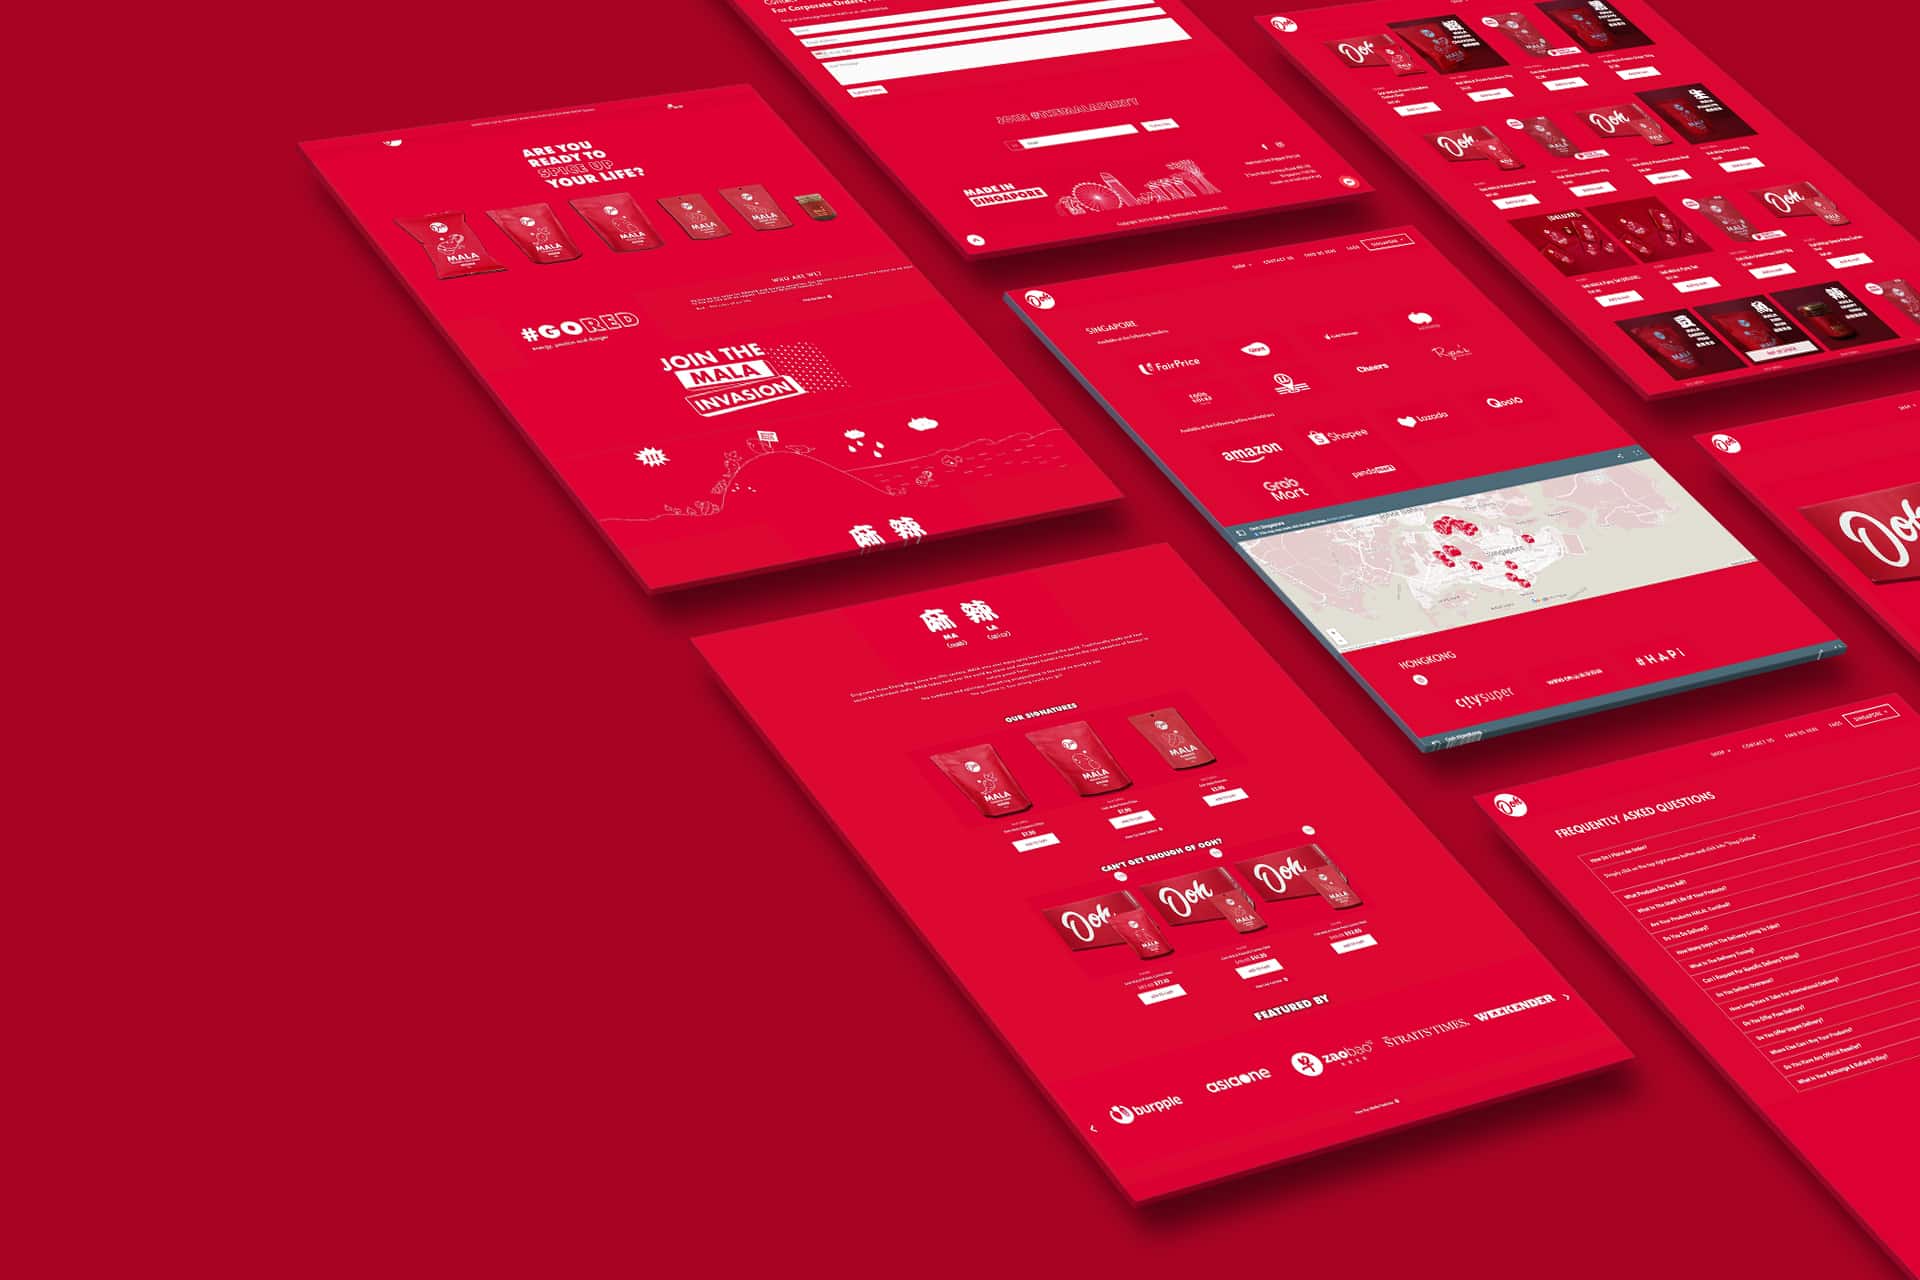 A red ui design on a red background.